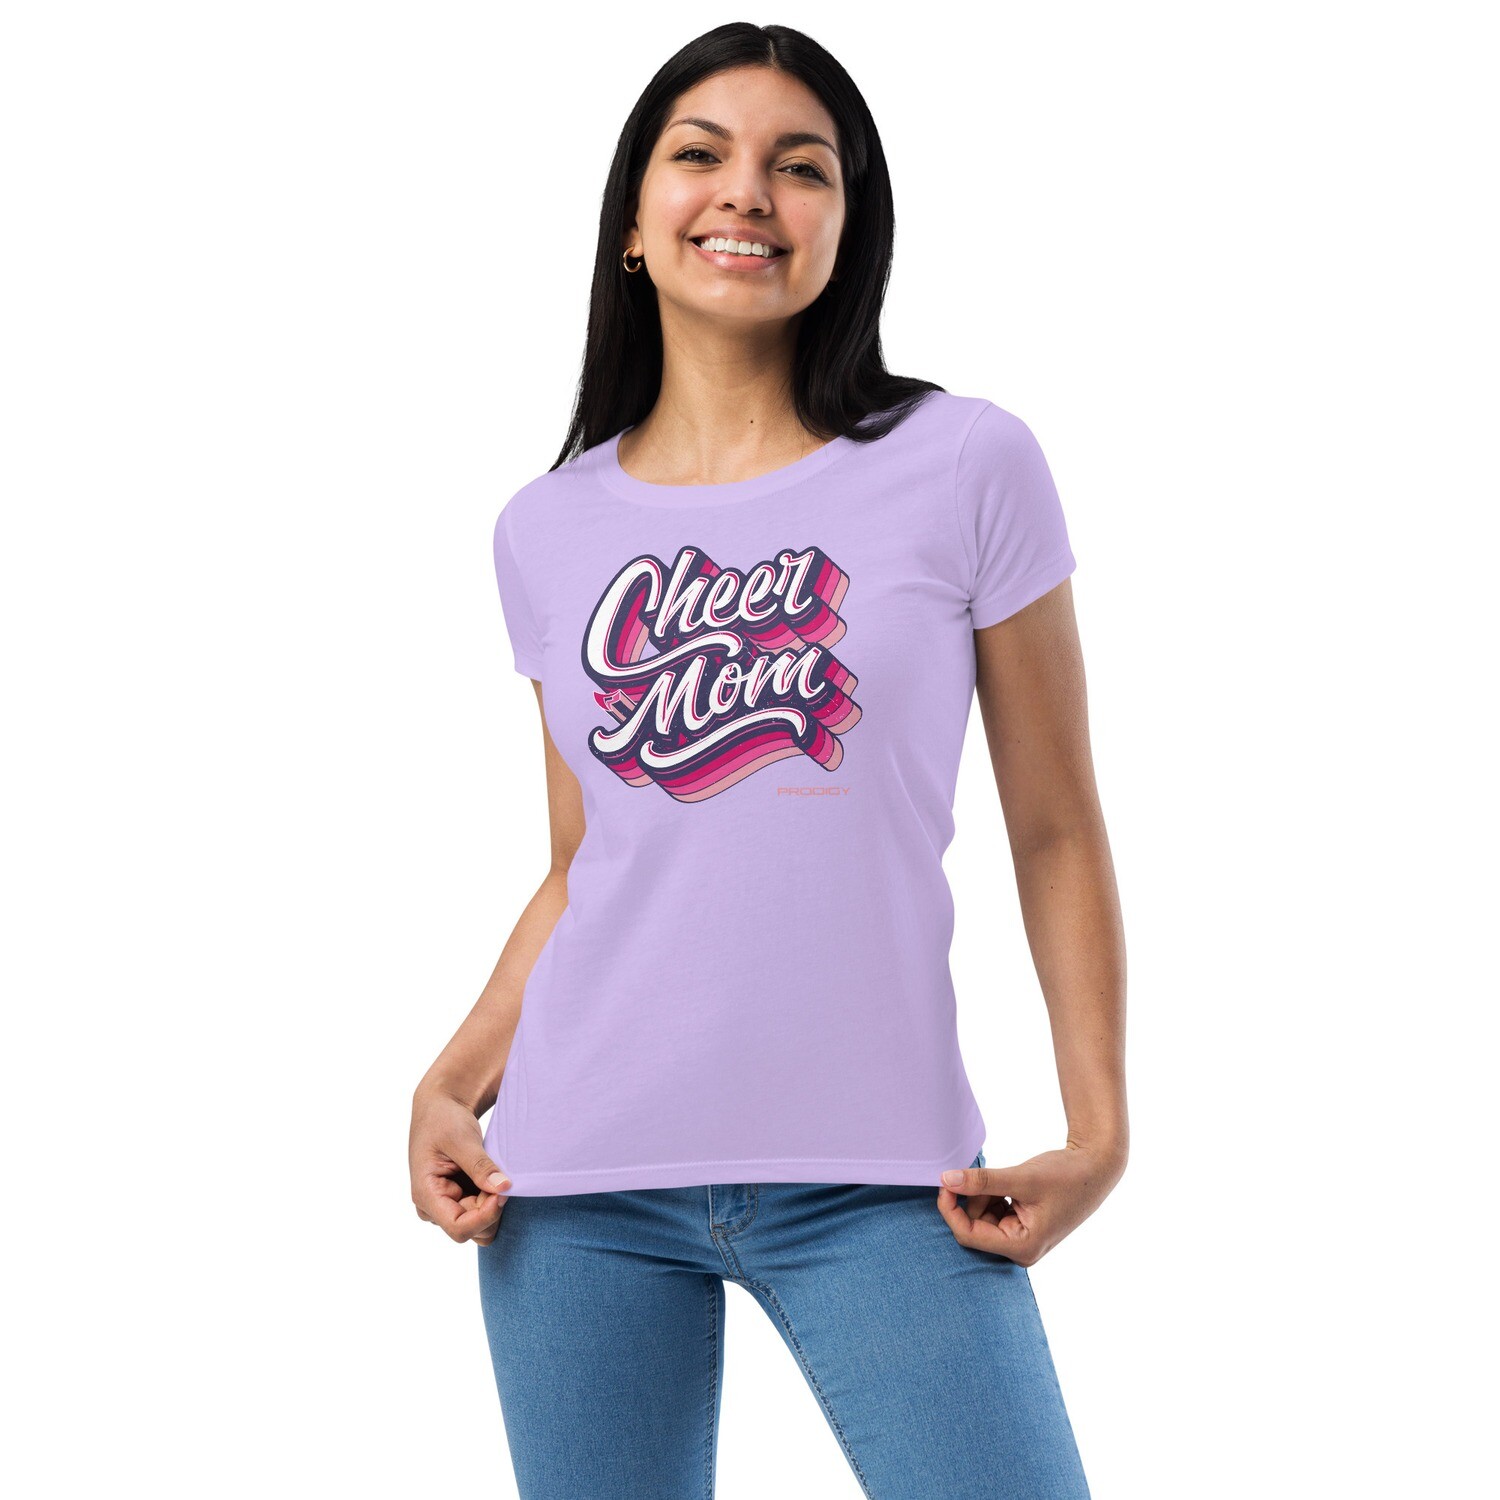 Women’s Fitted T-shirt (Cheer Mom Trail-Pink)